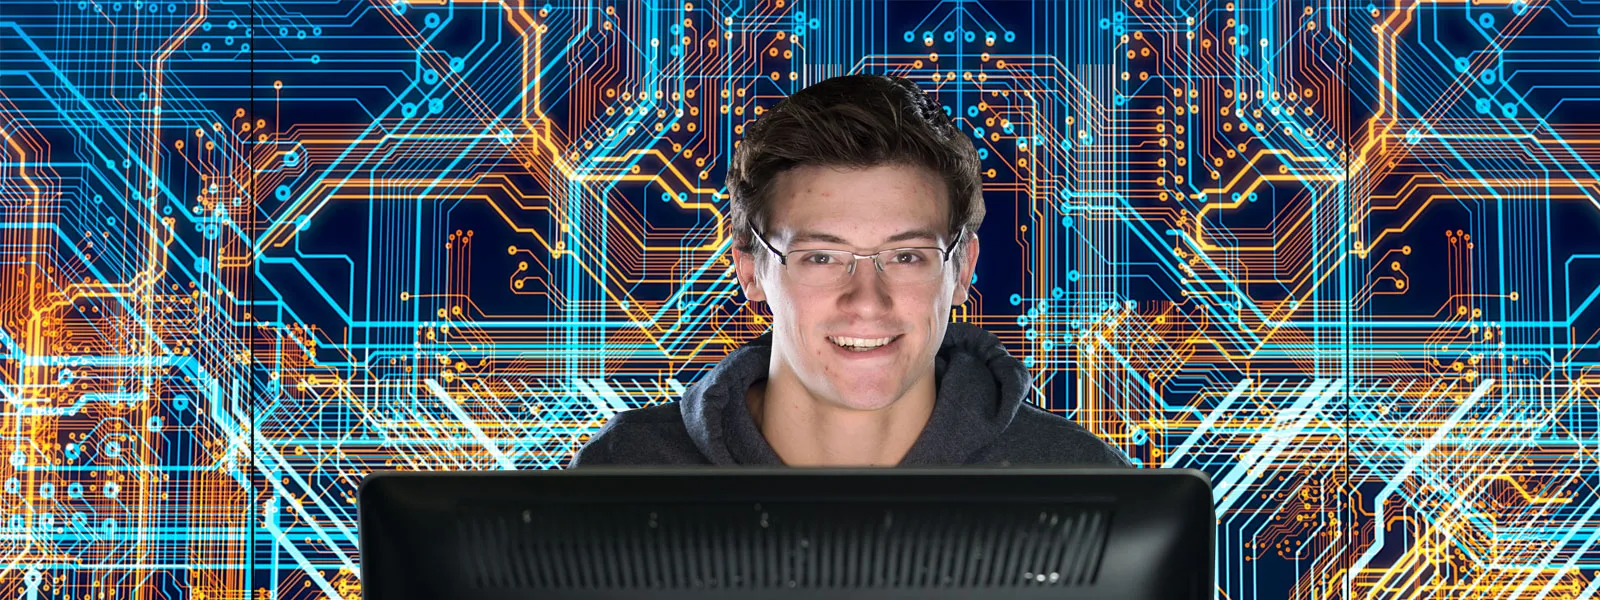 Student wears glasses and works on a computer in the digital lab at ECC Spartan Drive Campus.